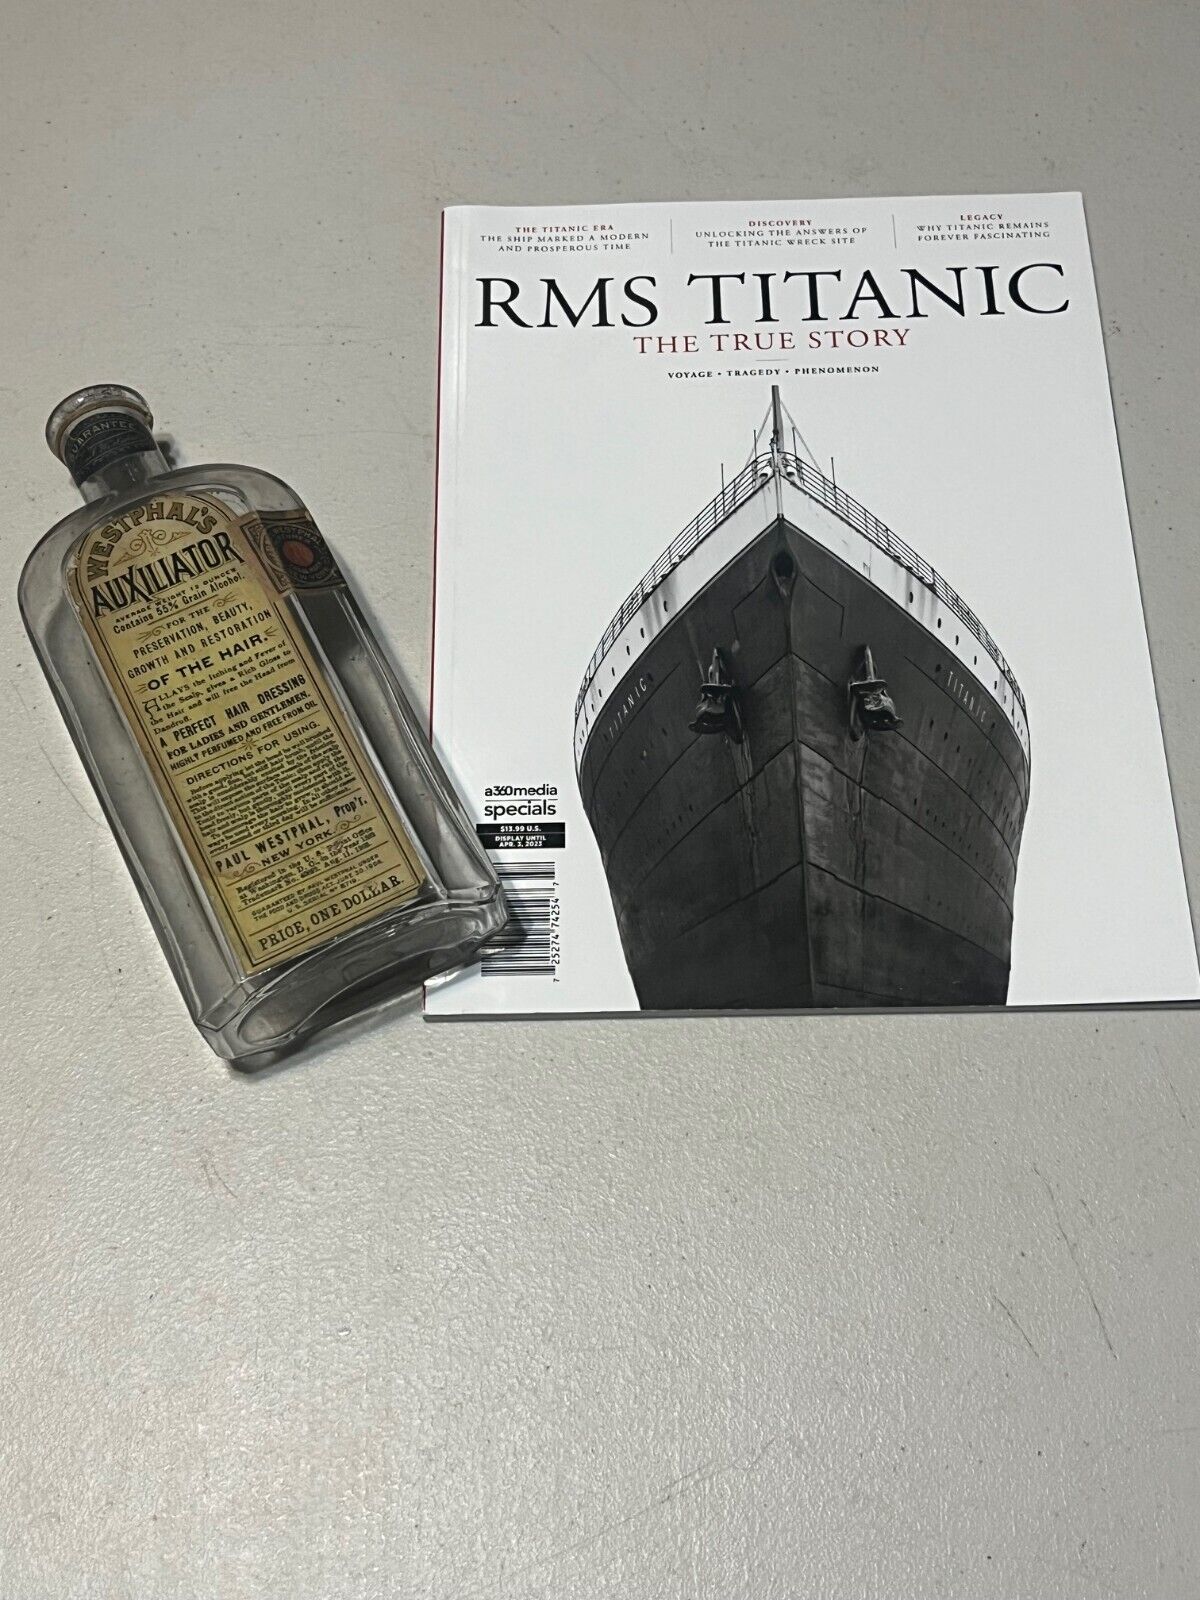 RMS TITANIC, Westphaul's Auxiliator hair Tonic, as found in wreckage, Rare